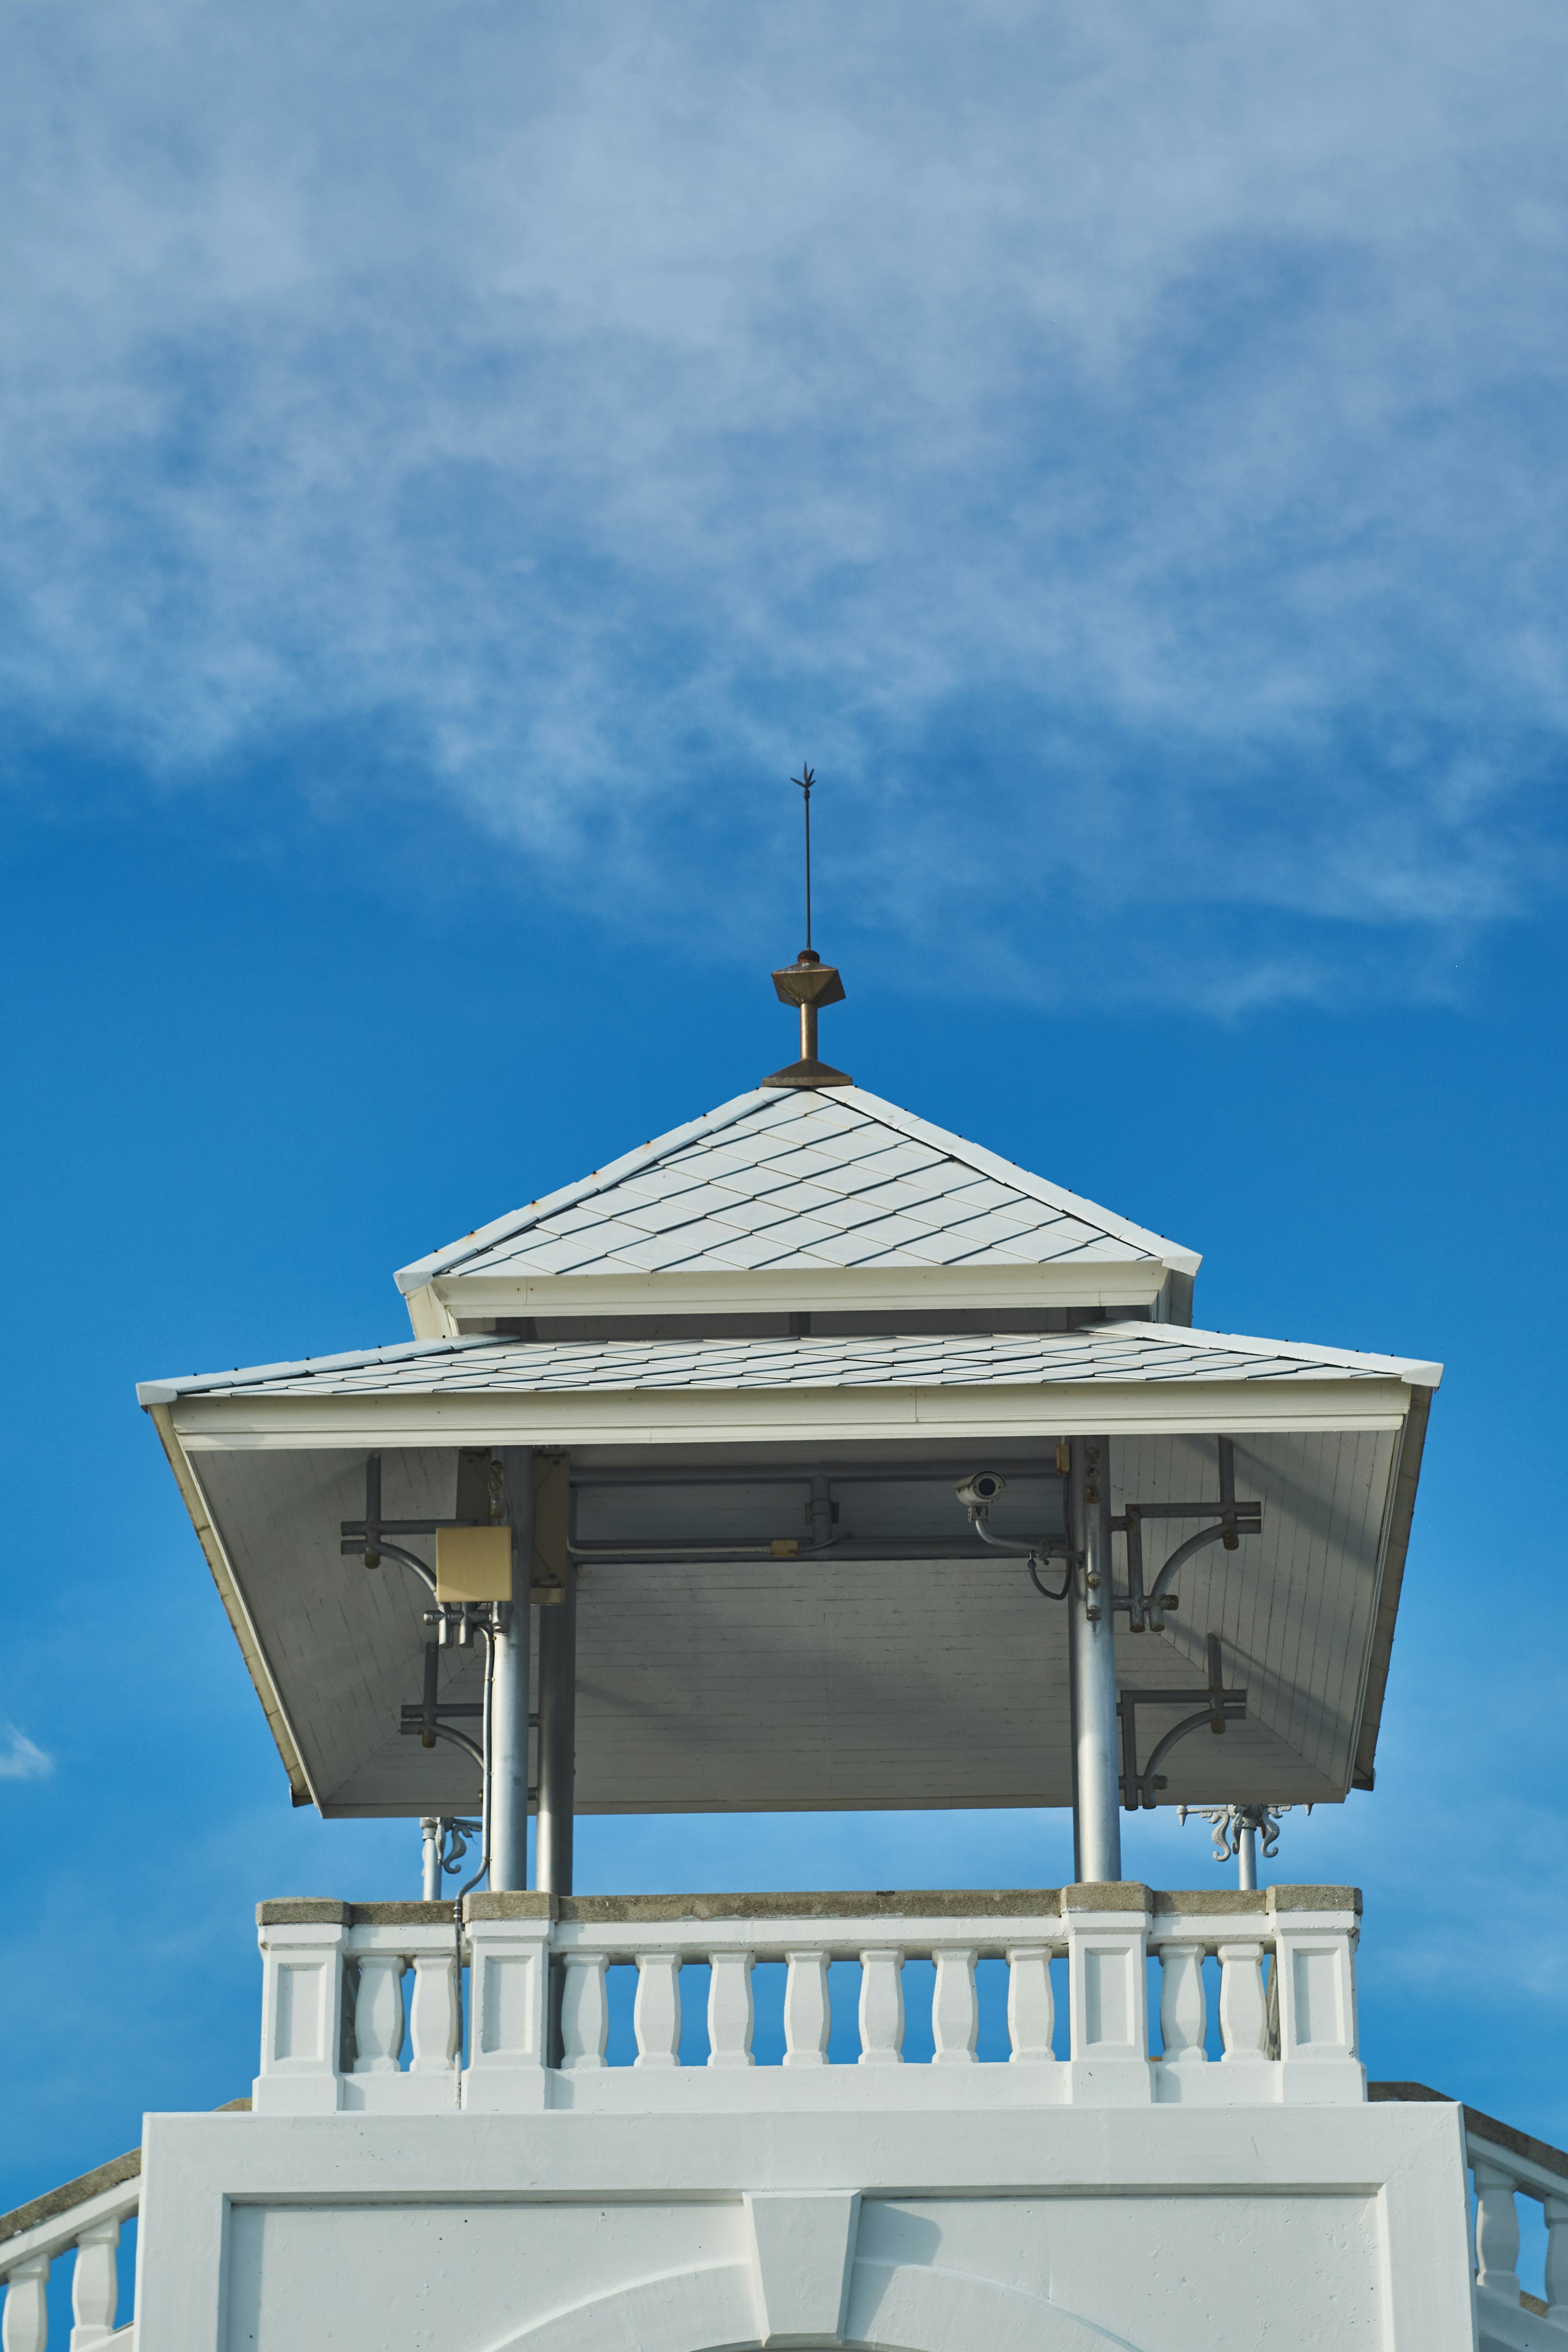 white and brown wooden gazebo under blue sky during daytime